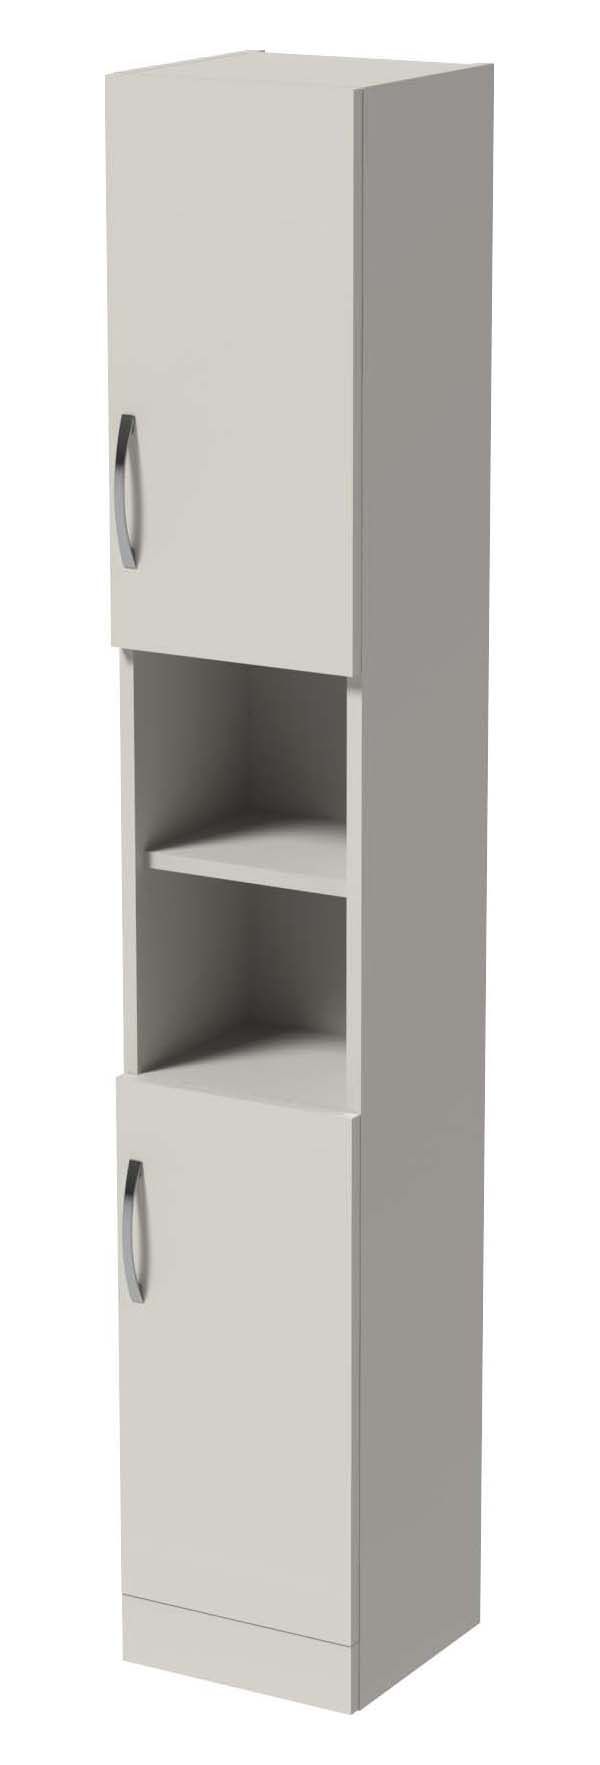 Image of Wickes Grey Gloss Tower Unit - 1800 x 300mm